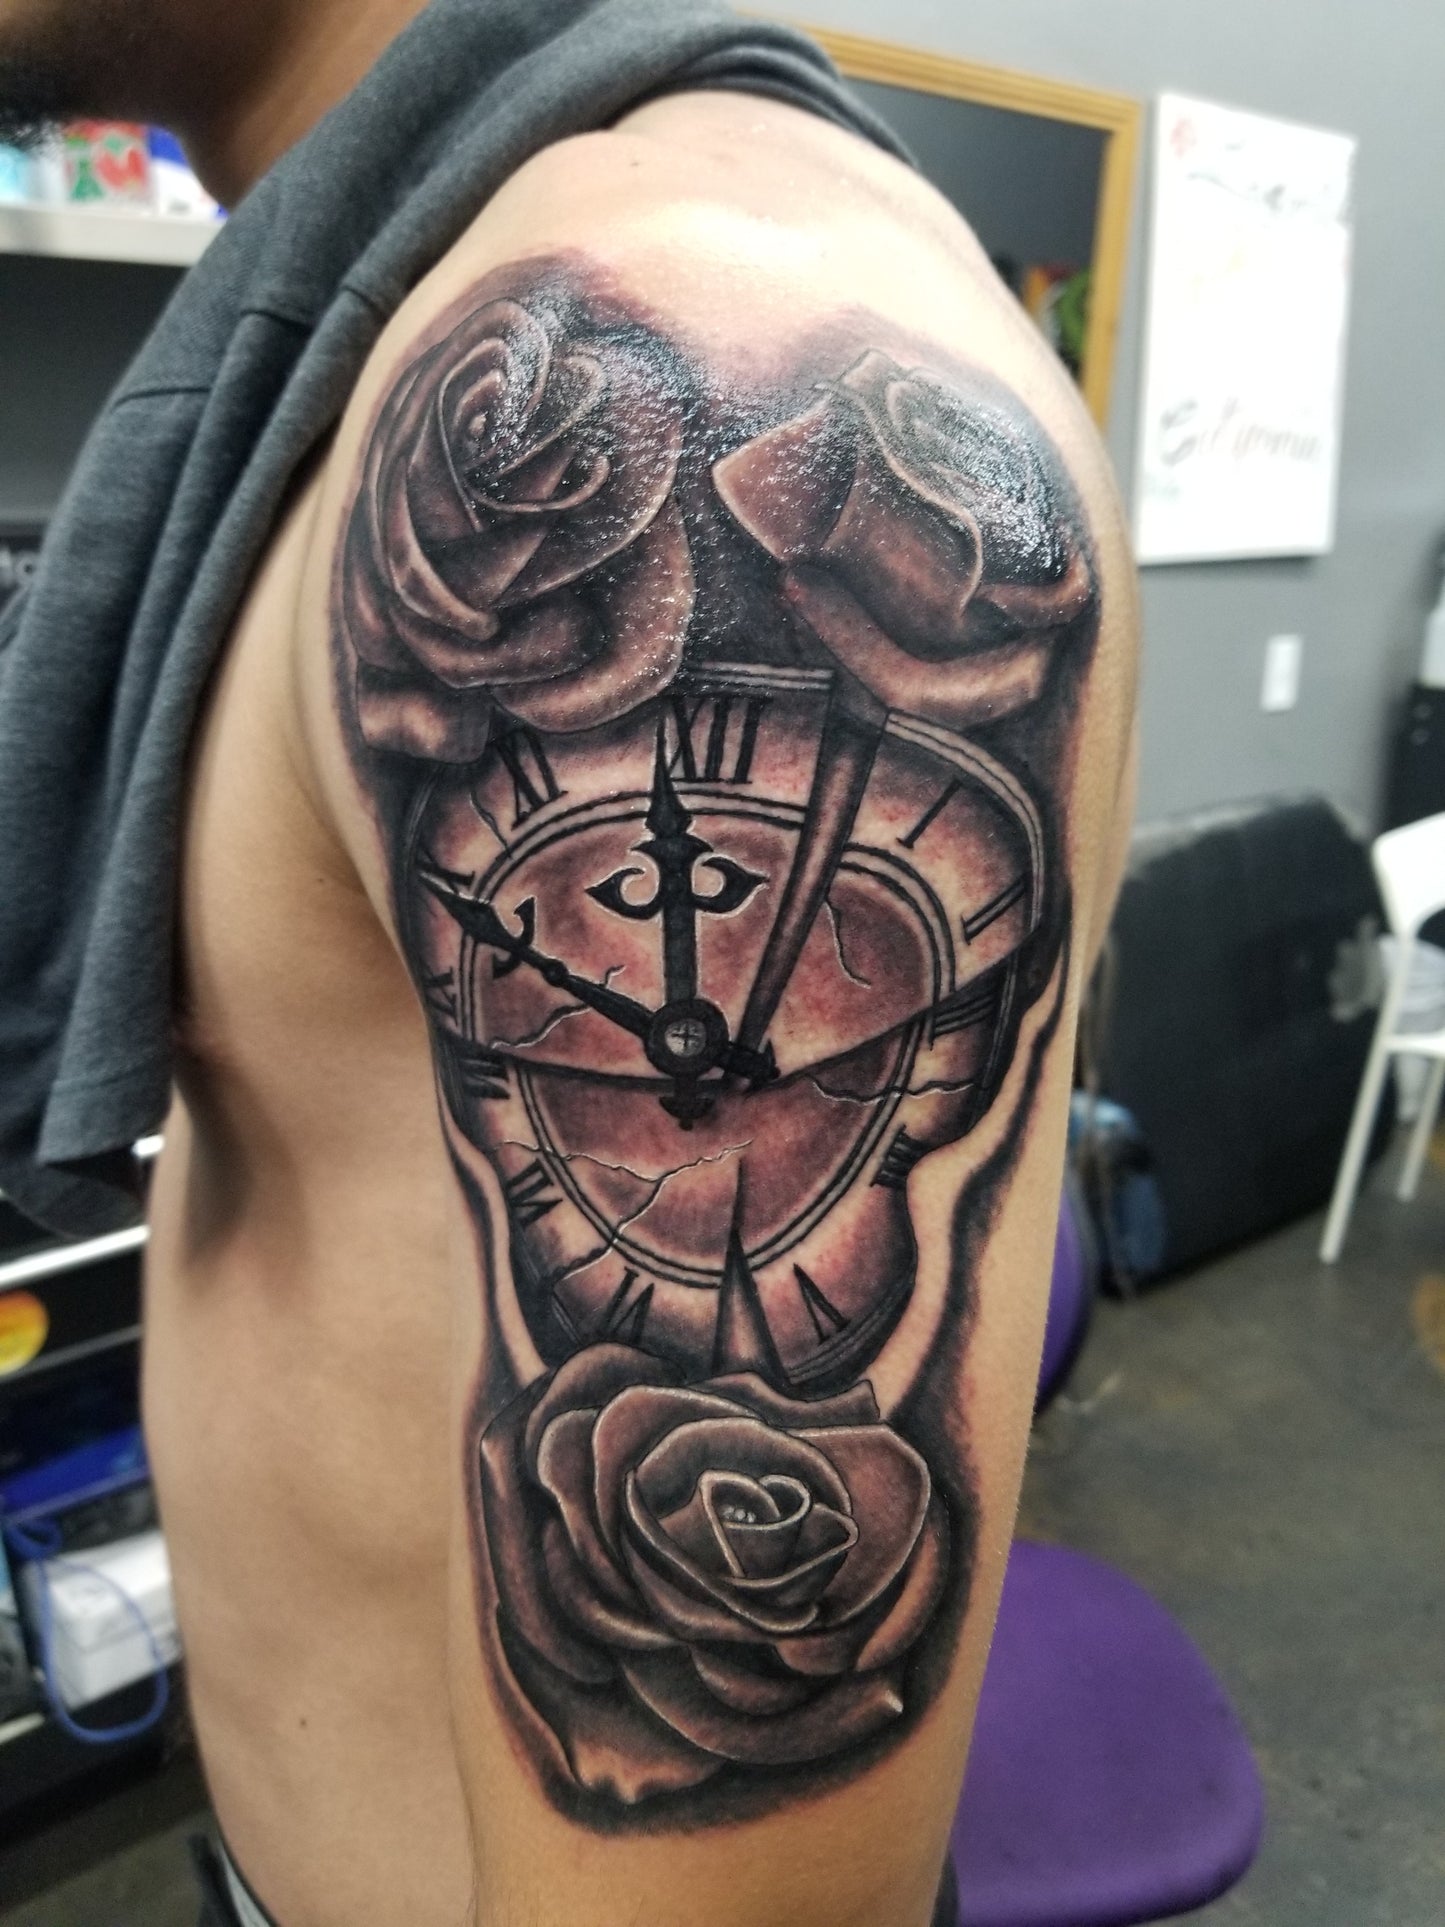 Full Day Tattoo Session Upper Arm